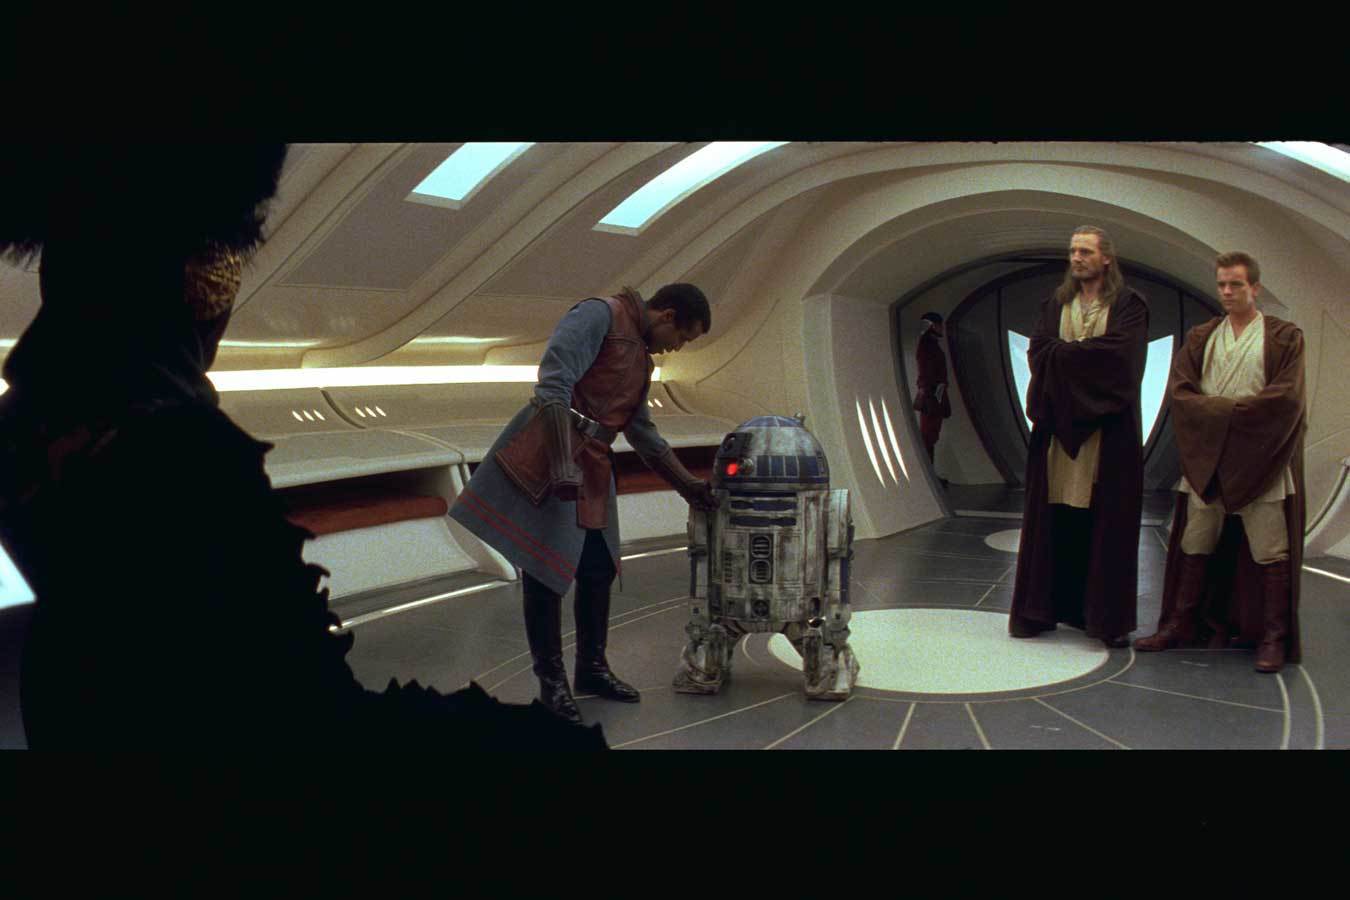 A grateful Amidala acknowledged R2-D2's bravery, and ordered her handmaiden Padmé' to clean up th...